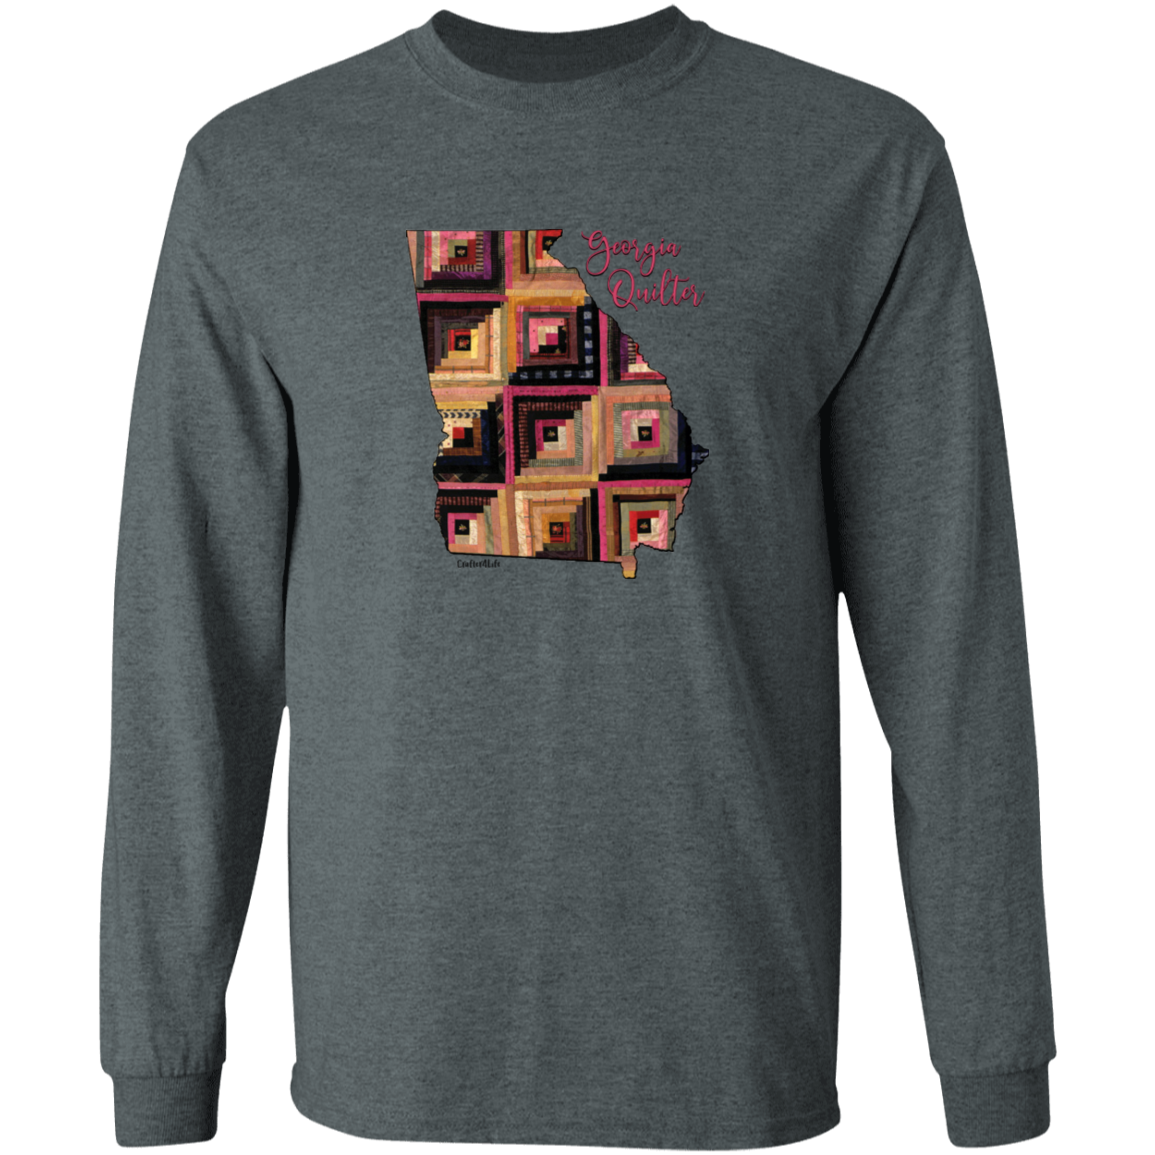 Georgia Quilter Long Sleeve T-Shirt, Gift for Quilting Friends and Family